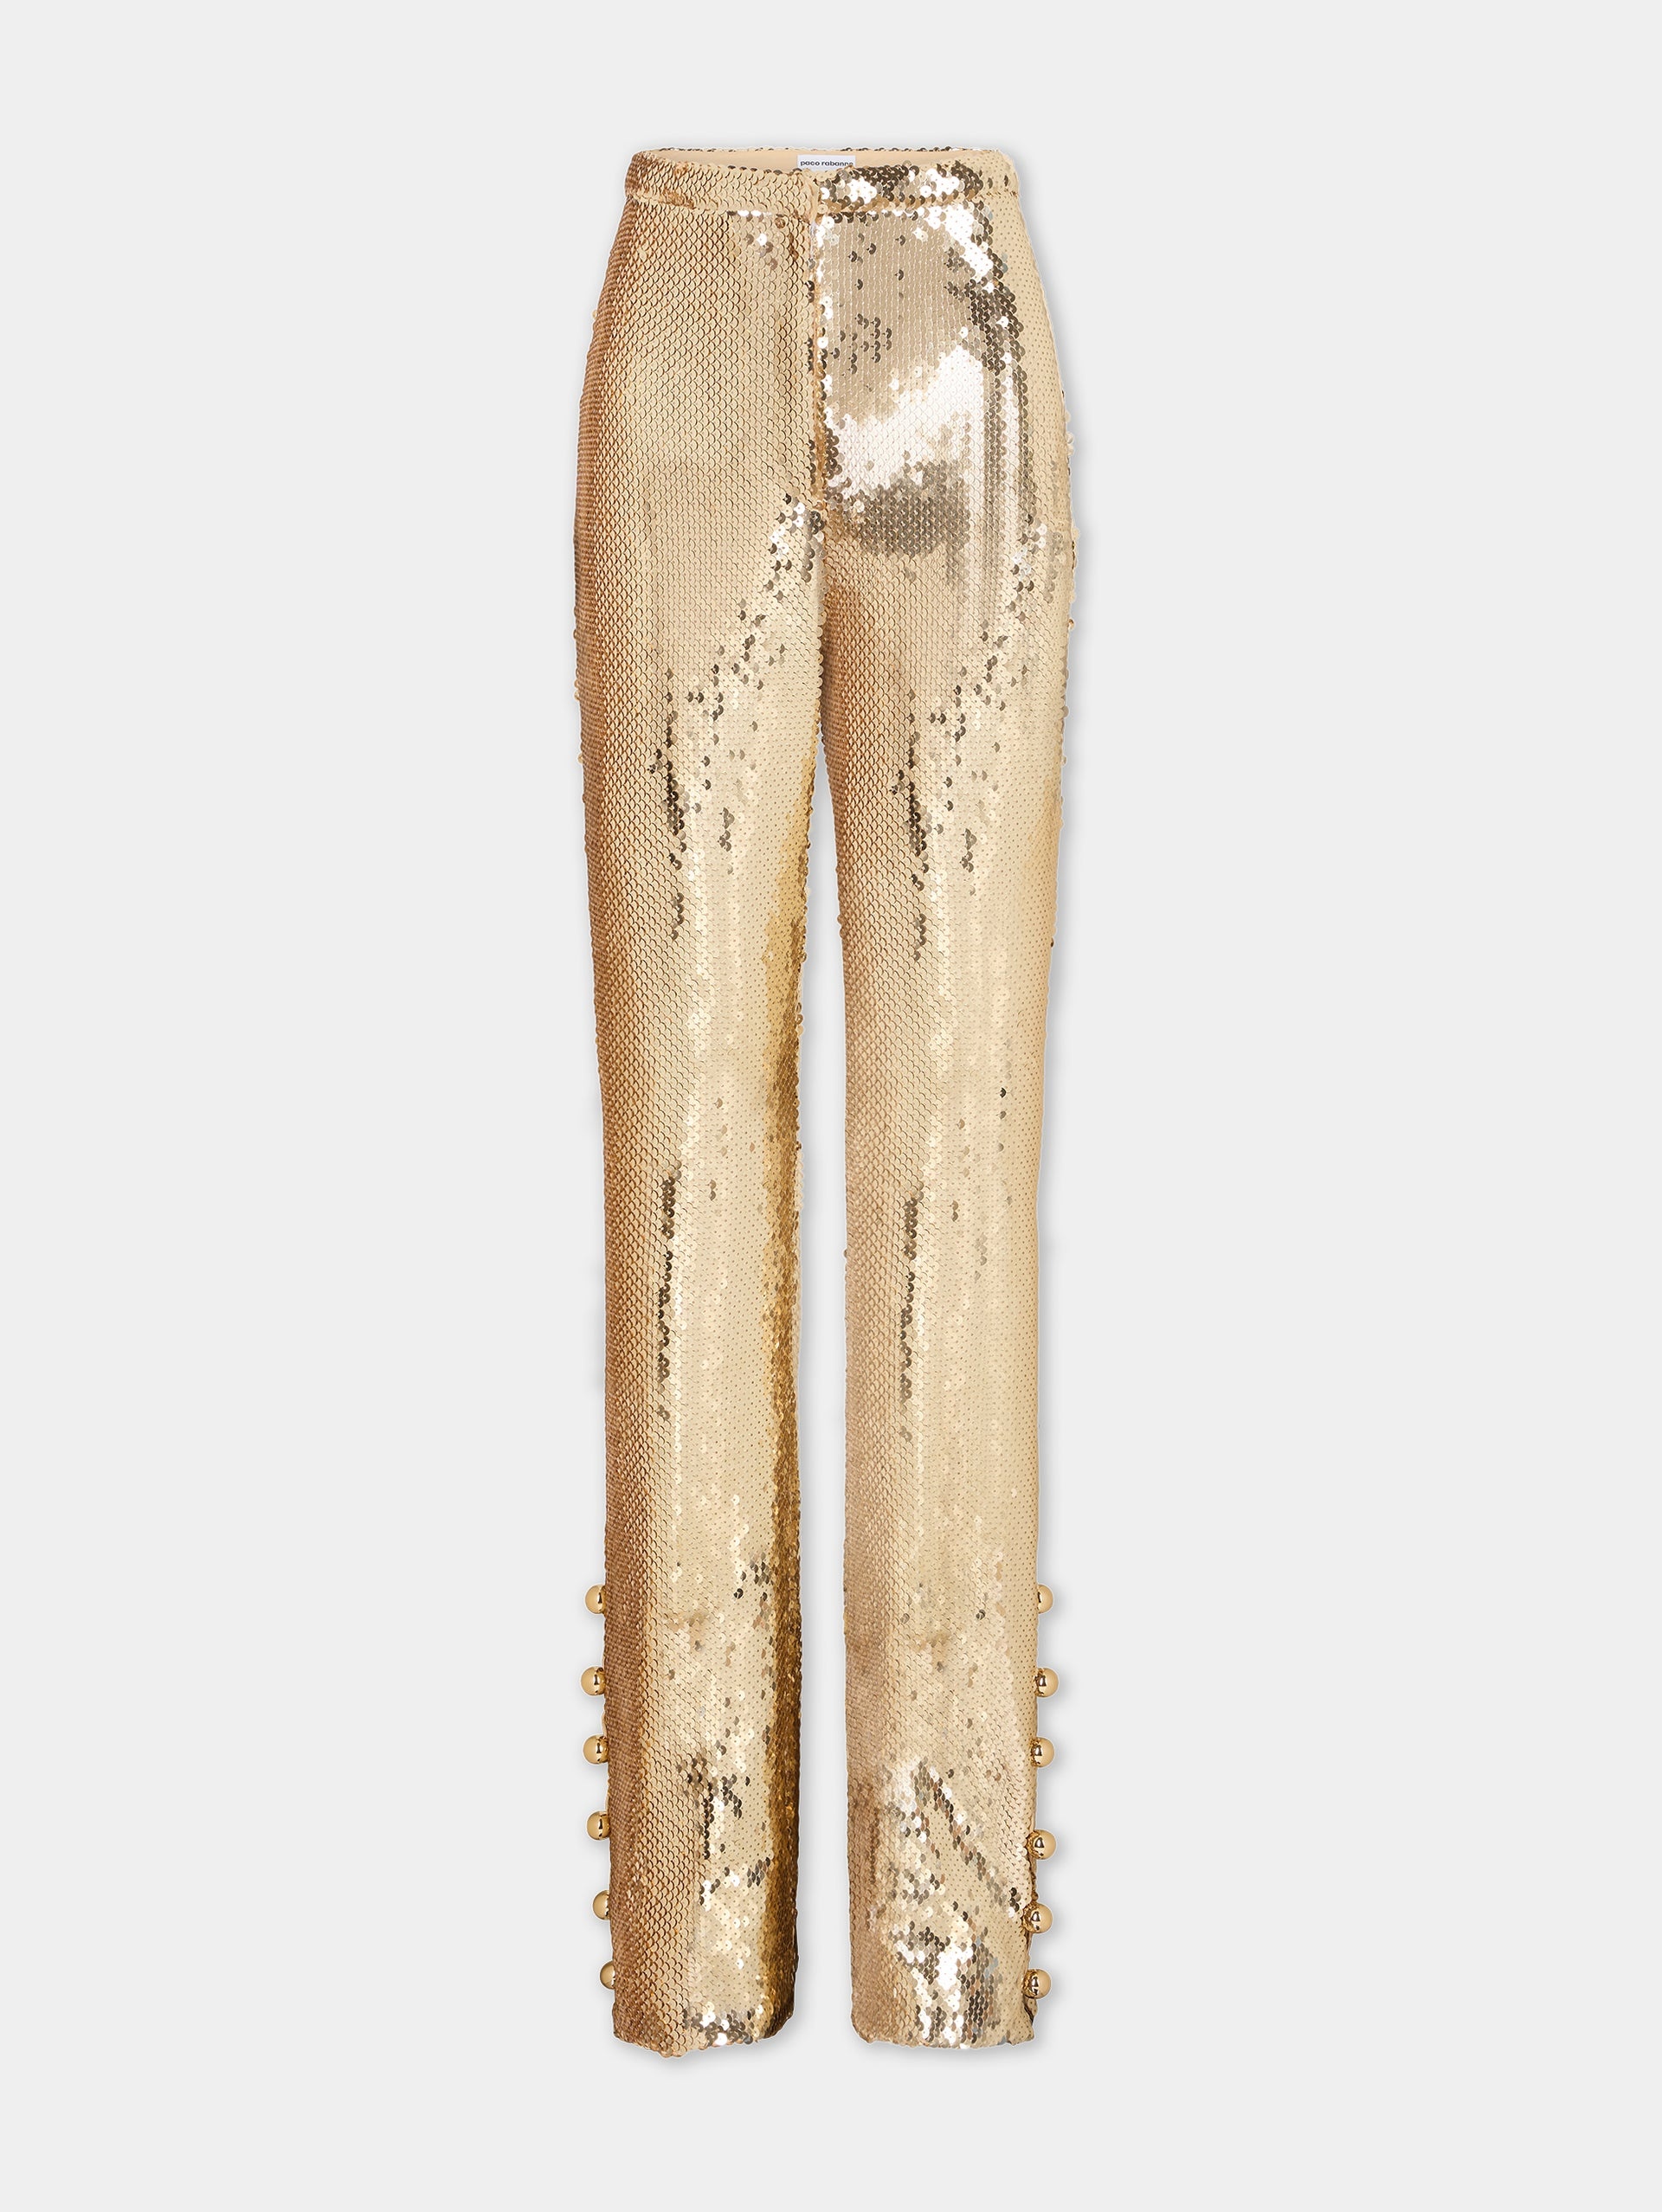 GOLD SEQUINS TROUSERS WITH METALLIC PEARLED DETAIL - 1